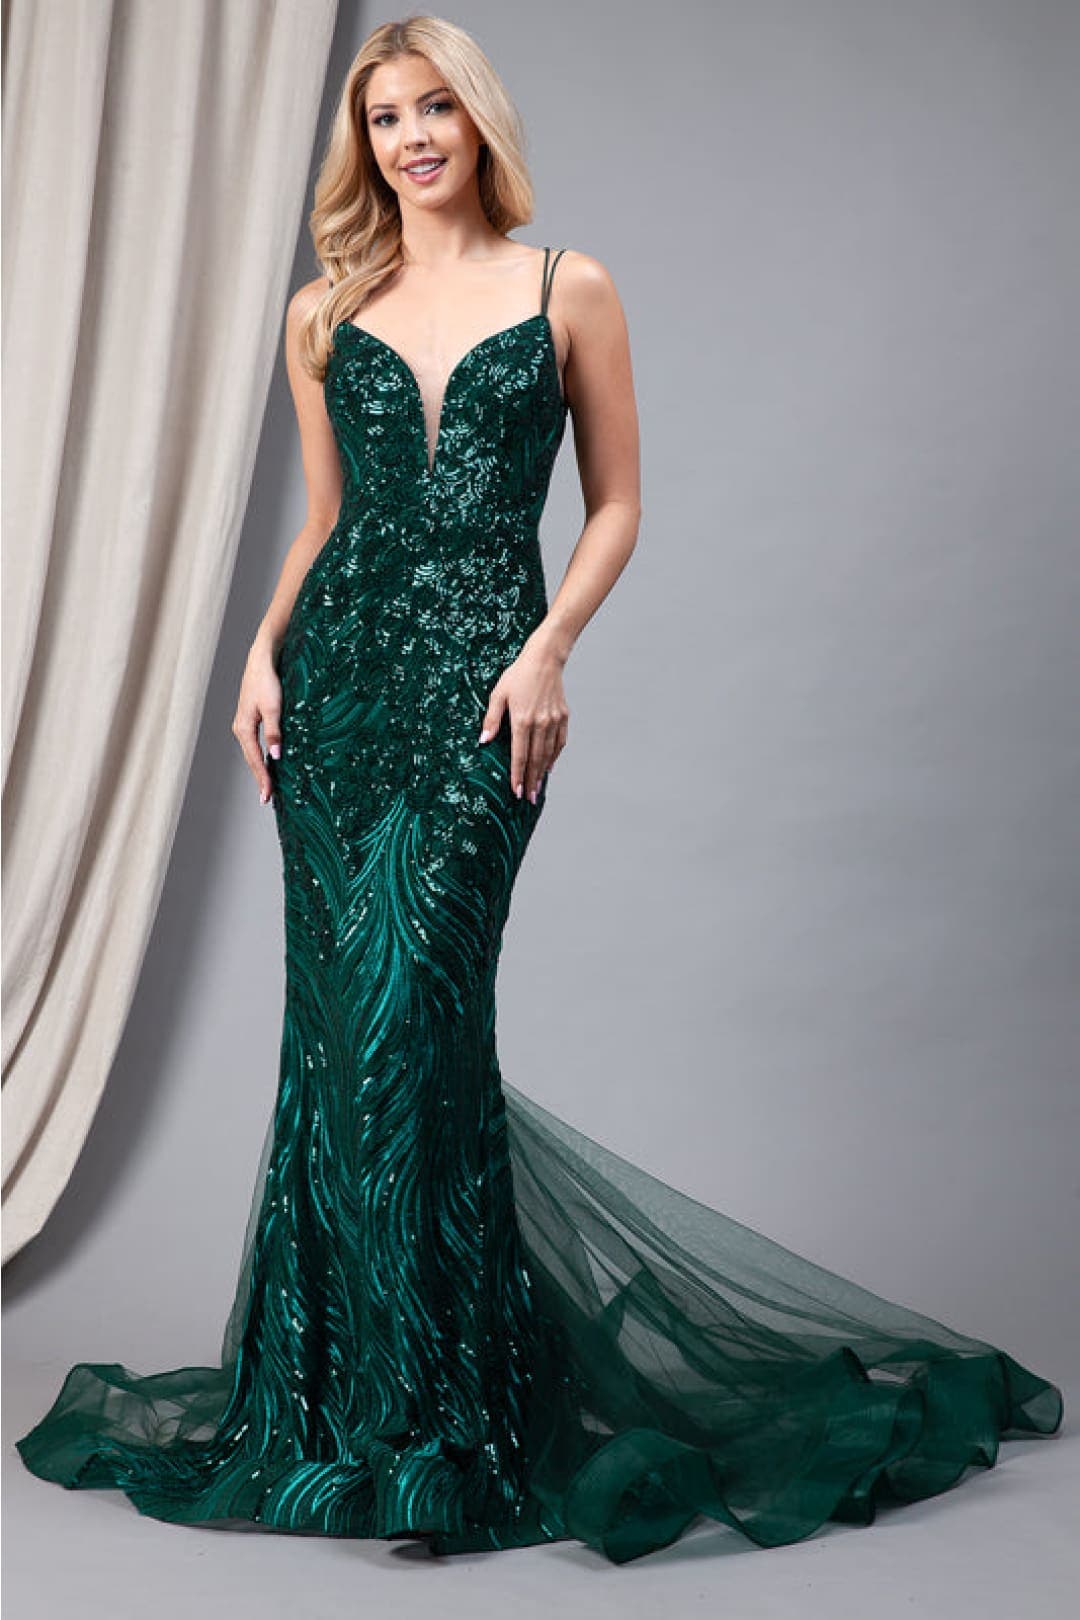 Mermaid Prom Dress 2023 With Illusion Back Emerald Green Sequin Dress - Etsy